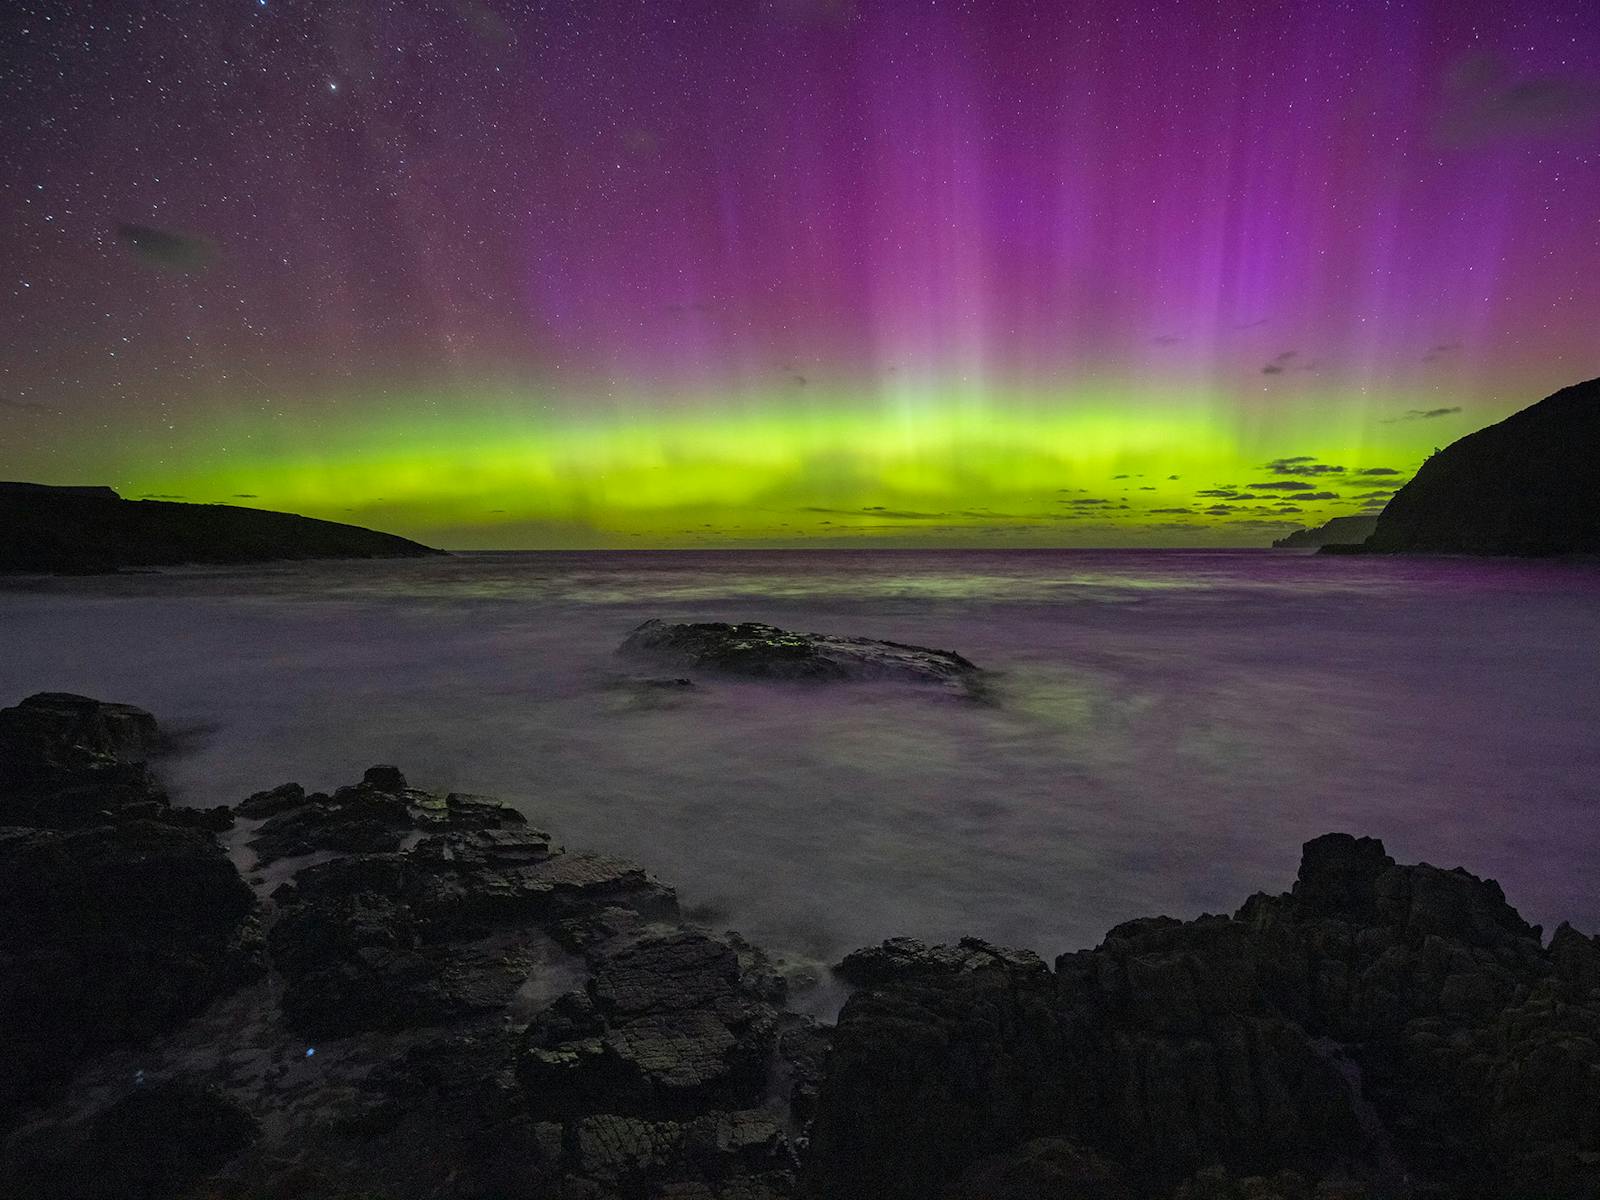 Aurora Australis, Tasman National Park. Astrophotography included in this photography workshop